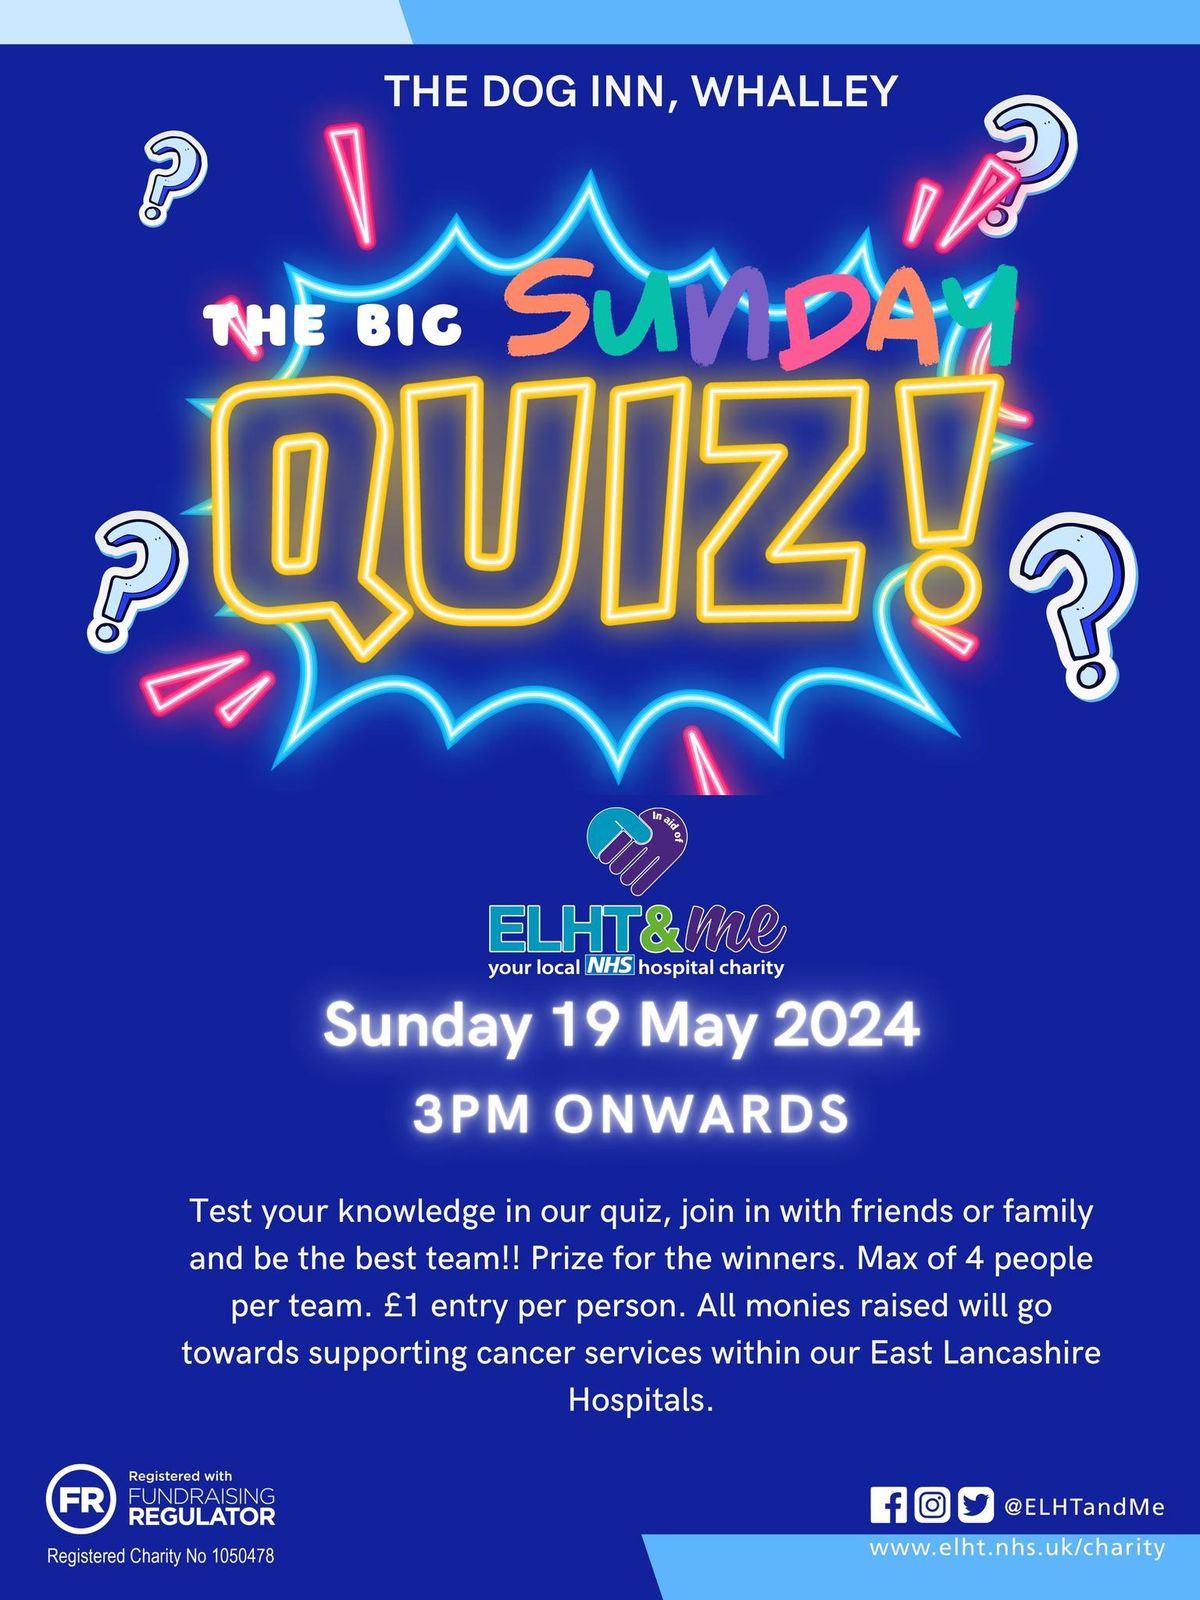 The big Sunday quiz at The Dog Inn, Whalley